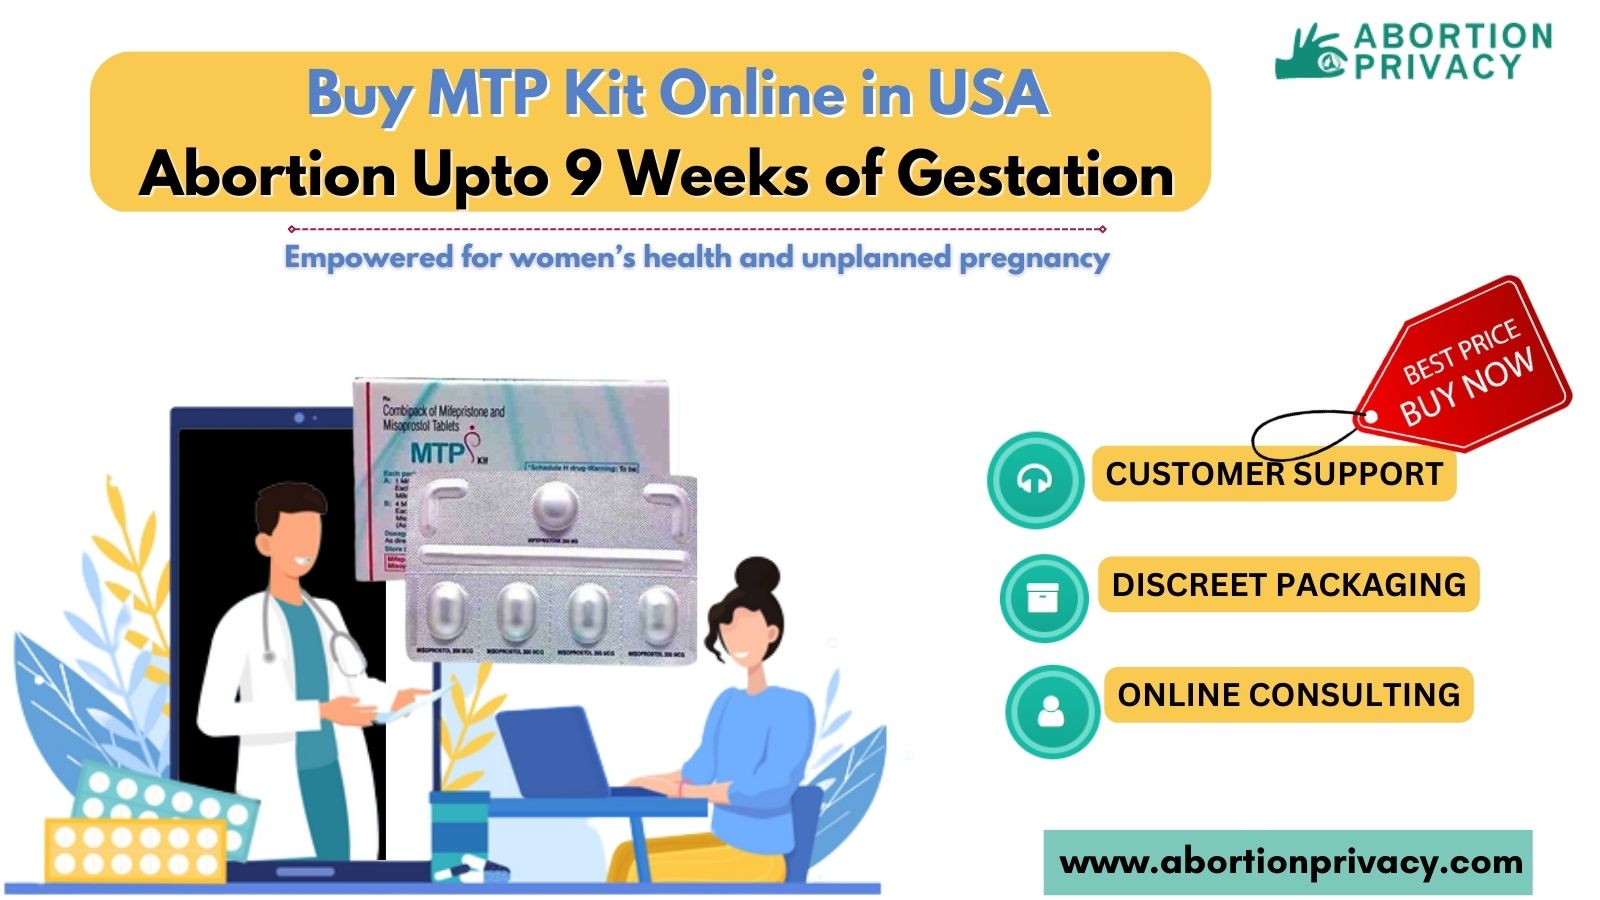 Buy MTP Kit Online in USA Abortion Upto 9 Weeks of Gestation - photo